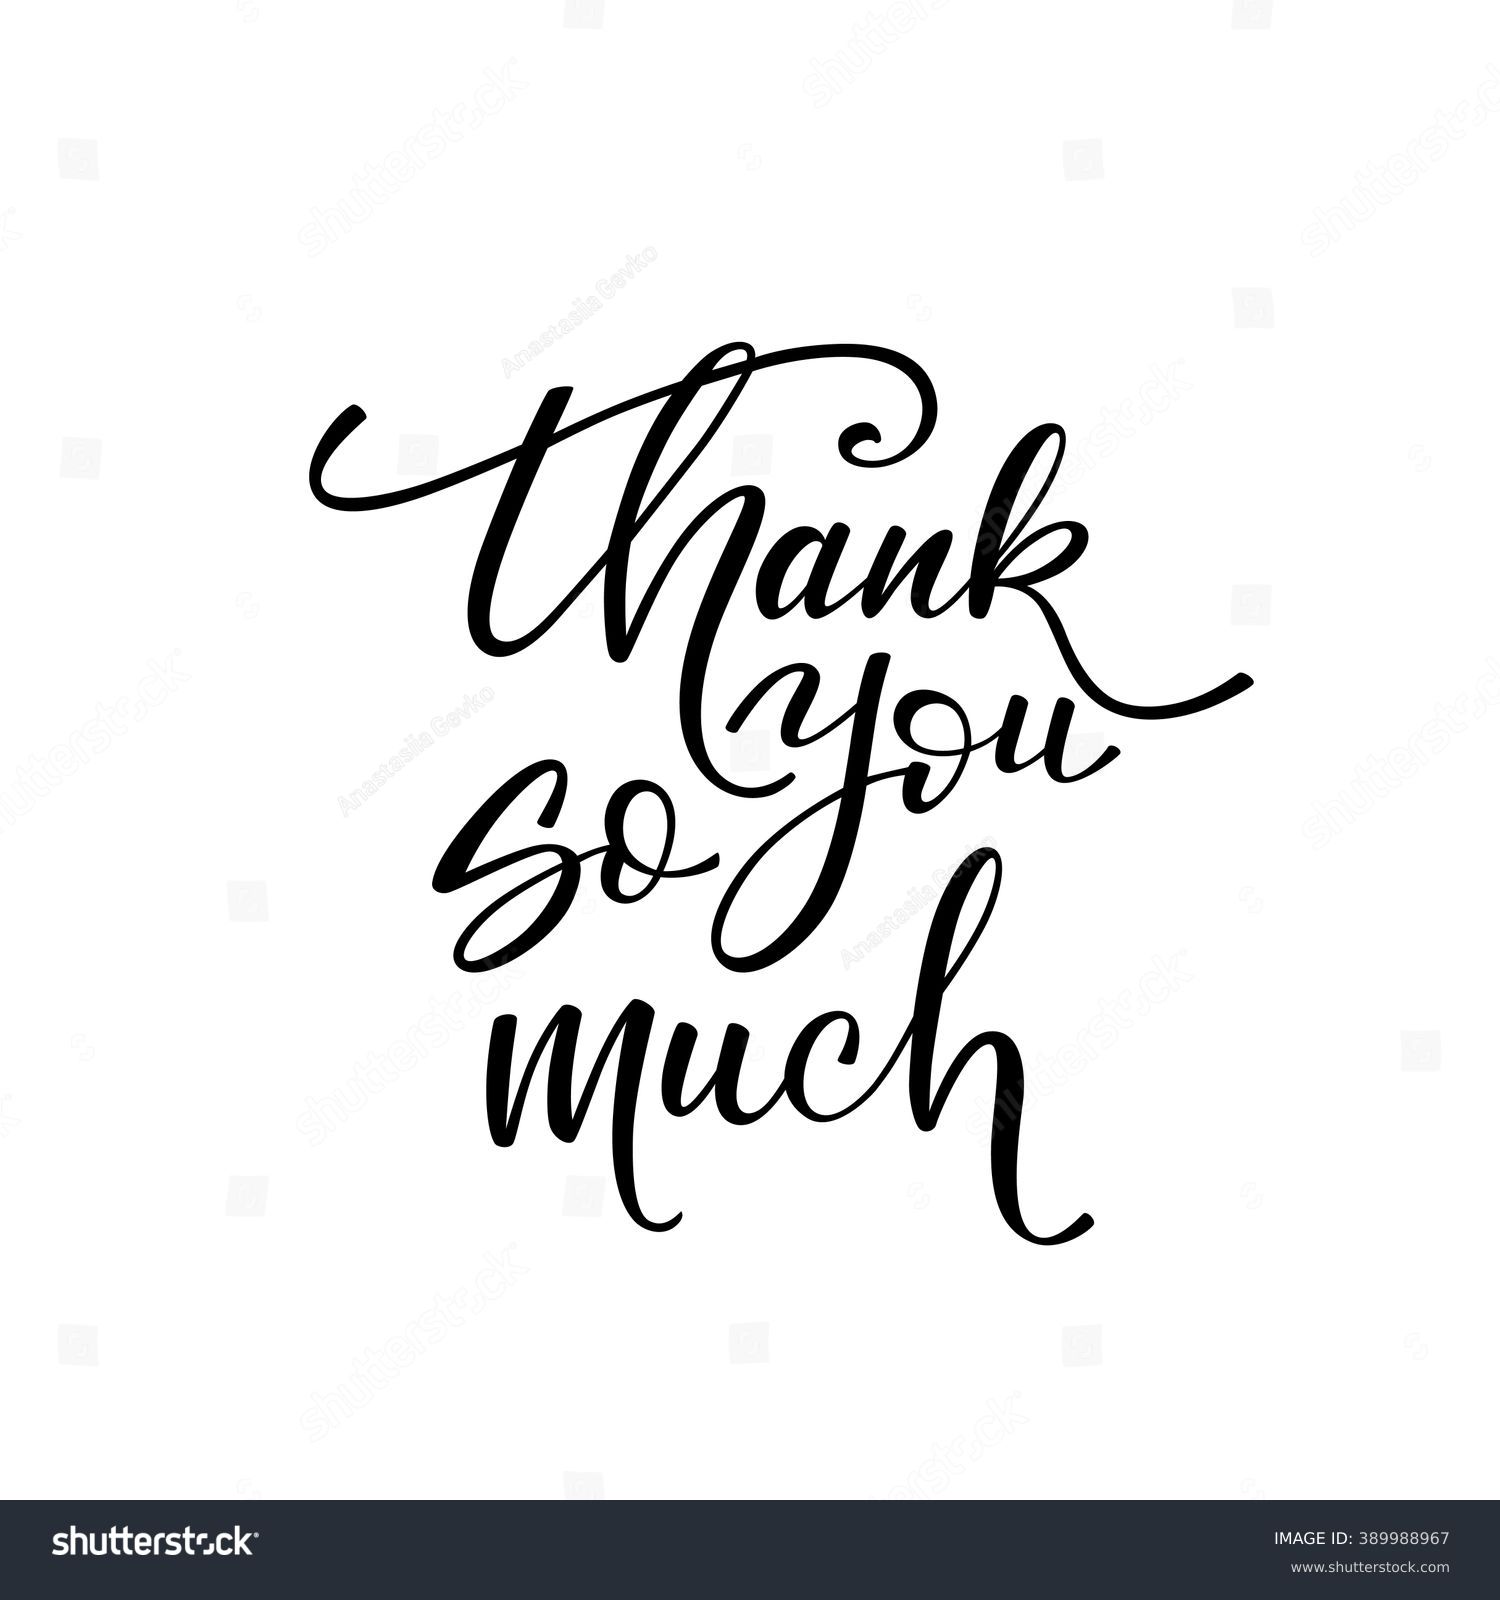 Thank You Much Card Hand Drawn Stock Vector Royalty Free 389988967 Shutterstock 8976